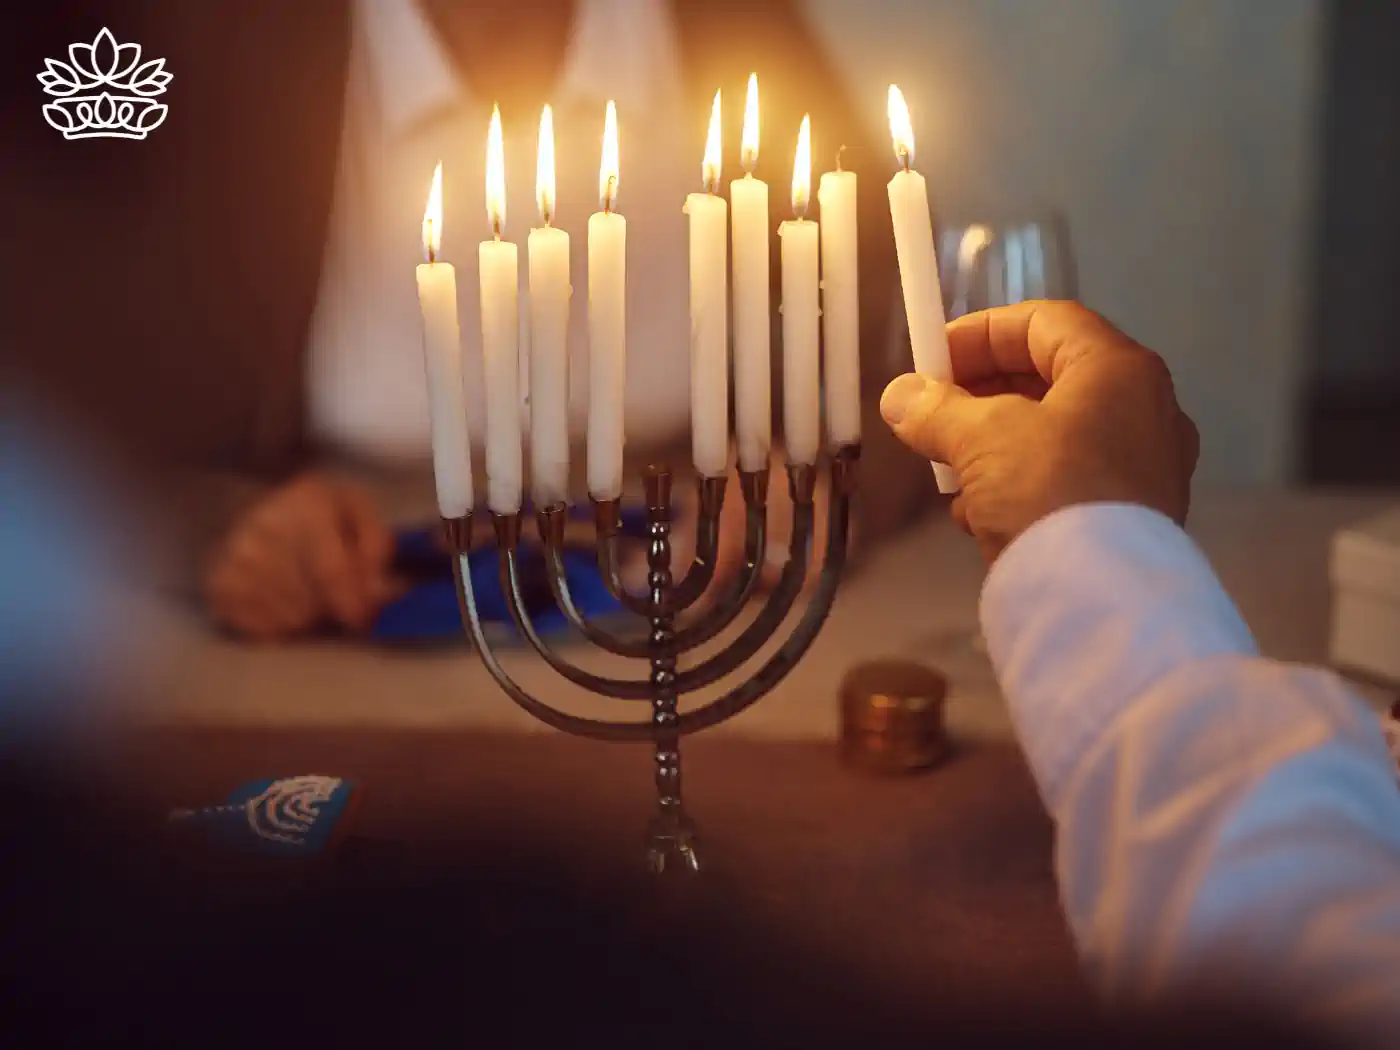 A hand lighting a white candle on a menorah, with eight other candles already lit, in a warm and cosy setting. Fabulous Flowers and Gifts - Hanukkah Flowers.